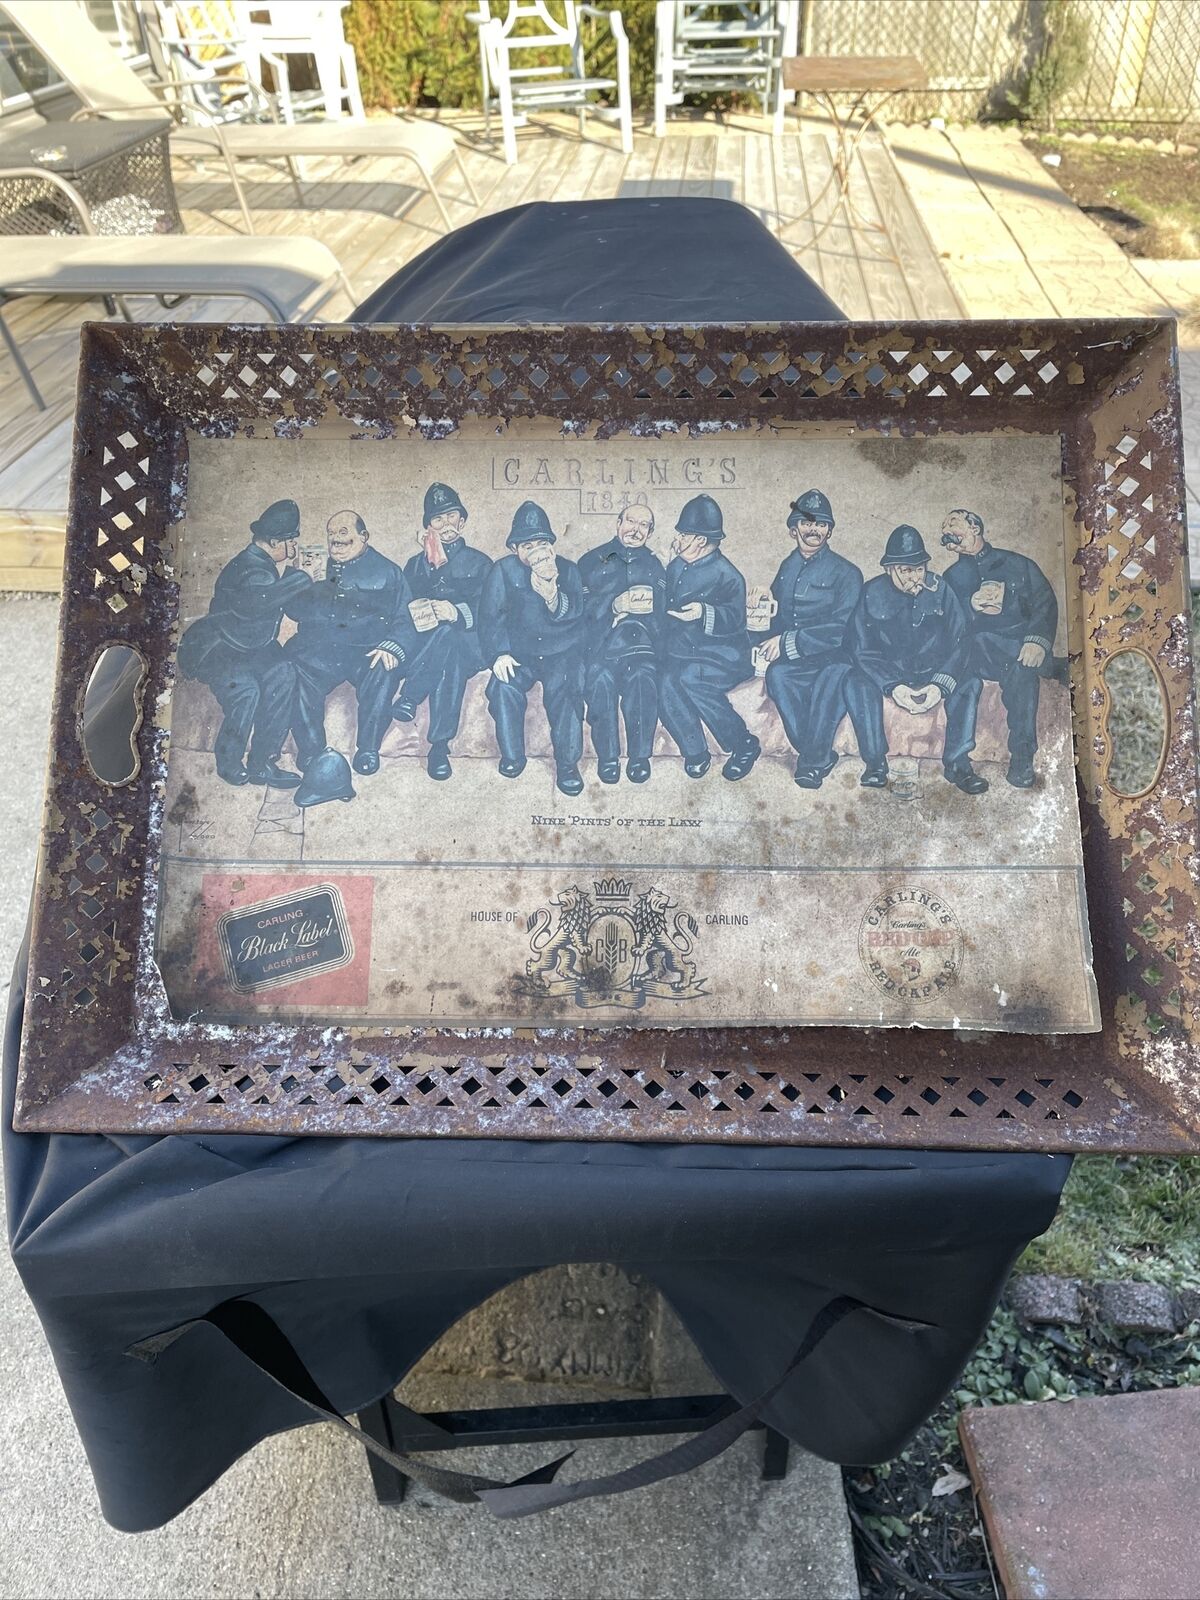 Vintage Carlings 1840 Black Label Red Cap Beer Tray Sign 'nine Pints Of The Law'